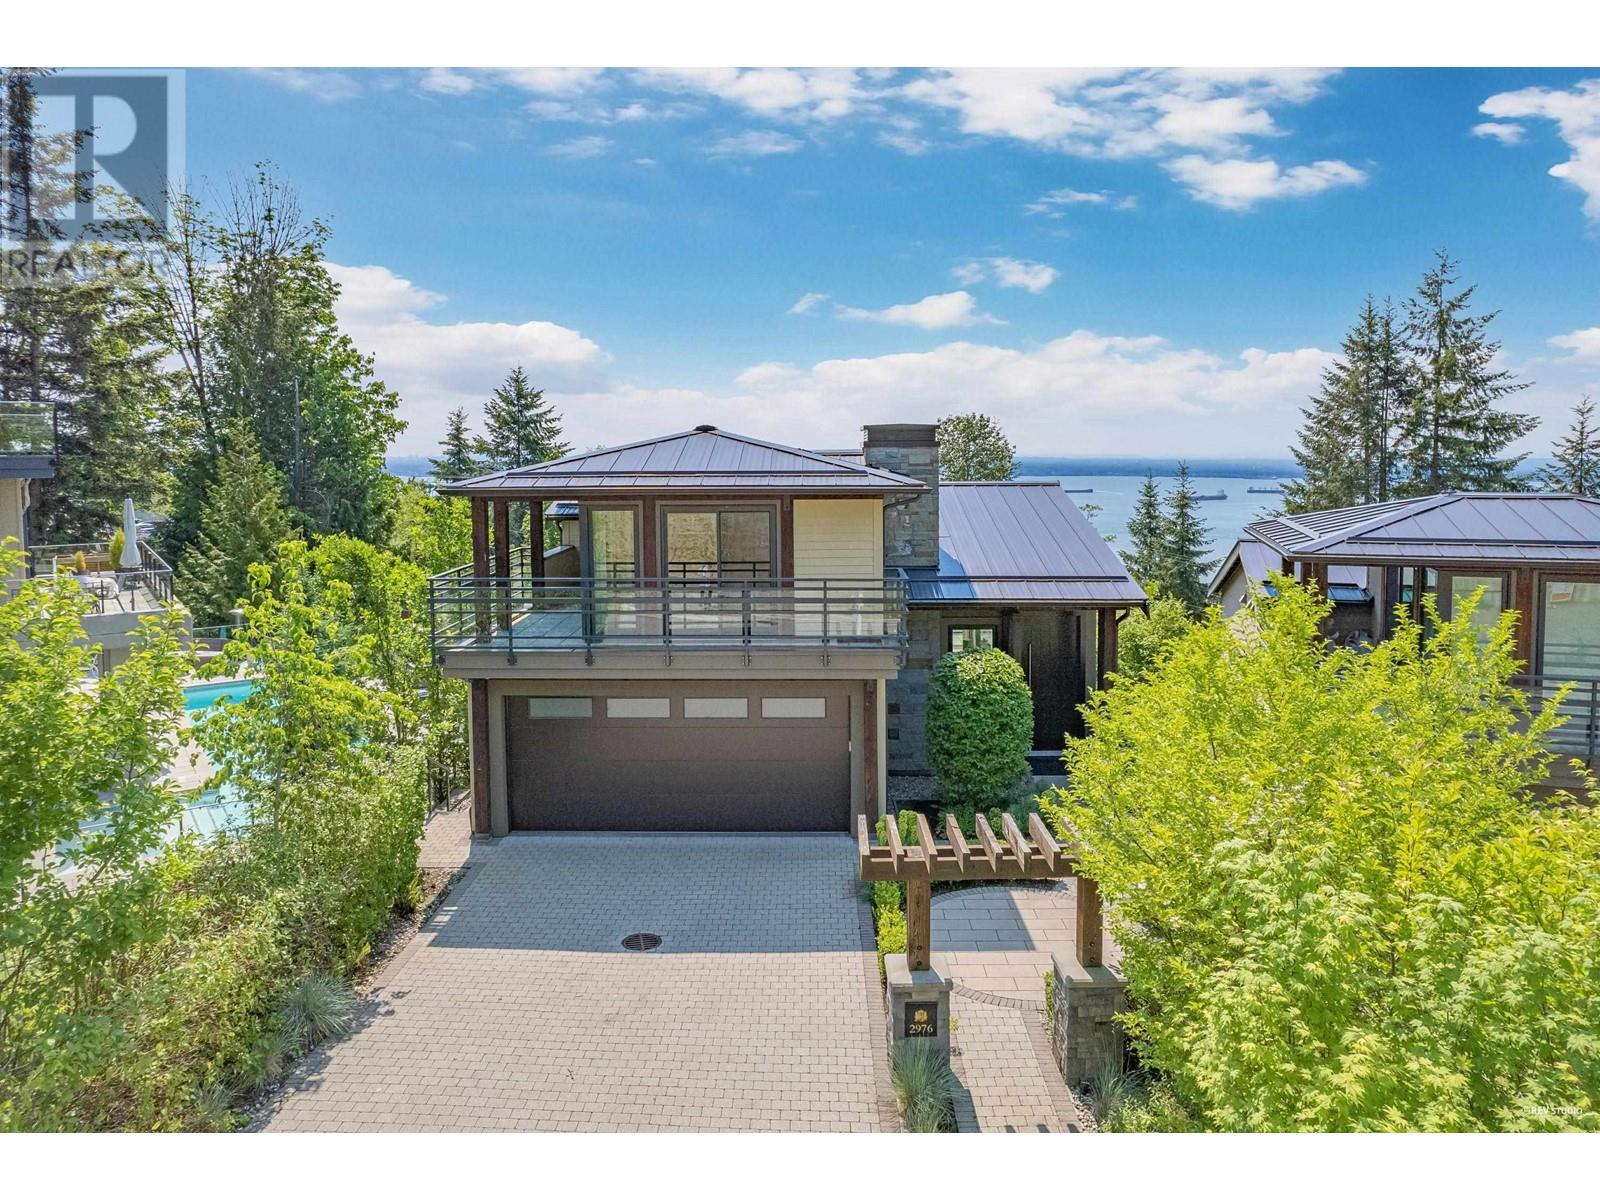 2976 BURFIELD PLACE located in West Vancouver, British Columbia